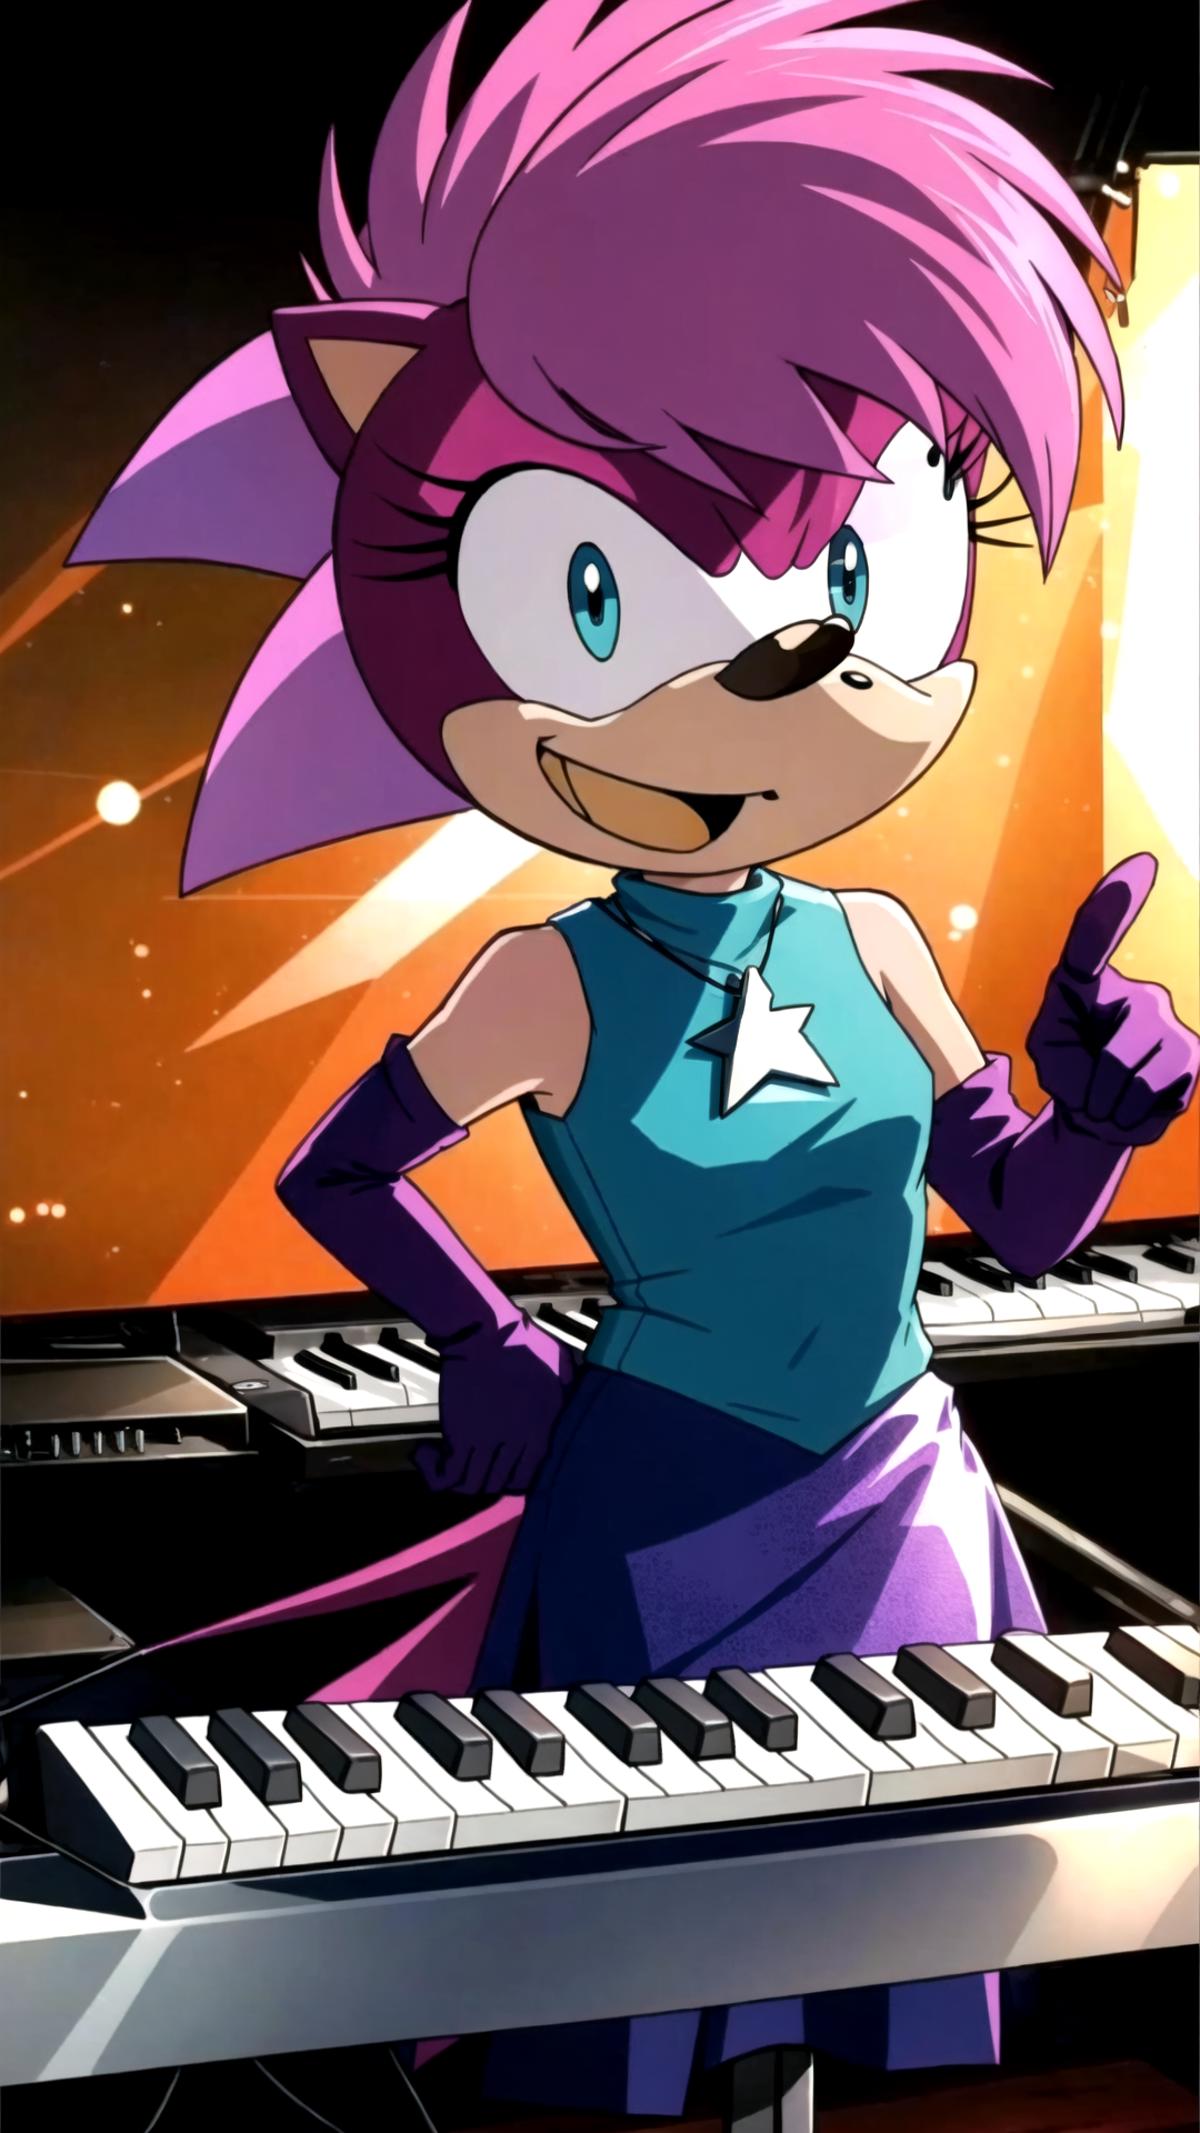 Sonia The Hedgehog (Sonic Underground) - Commision image by HC94